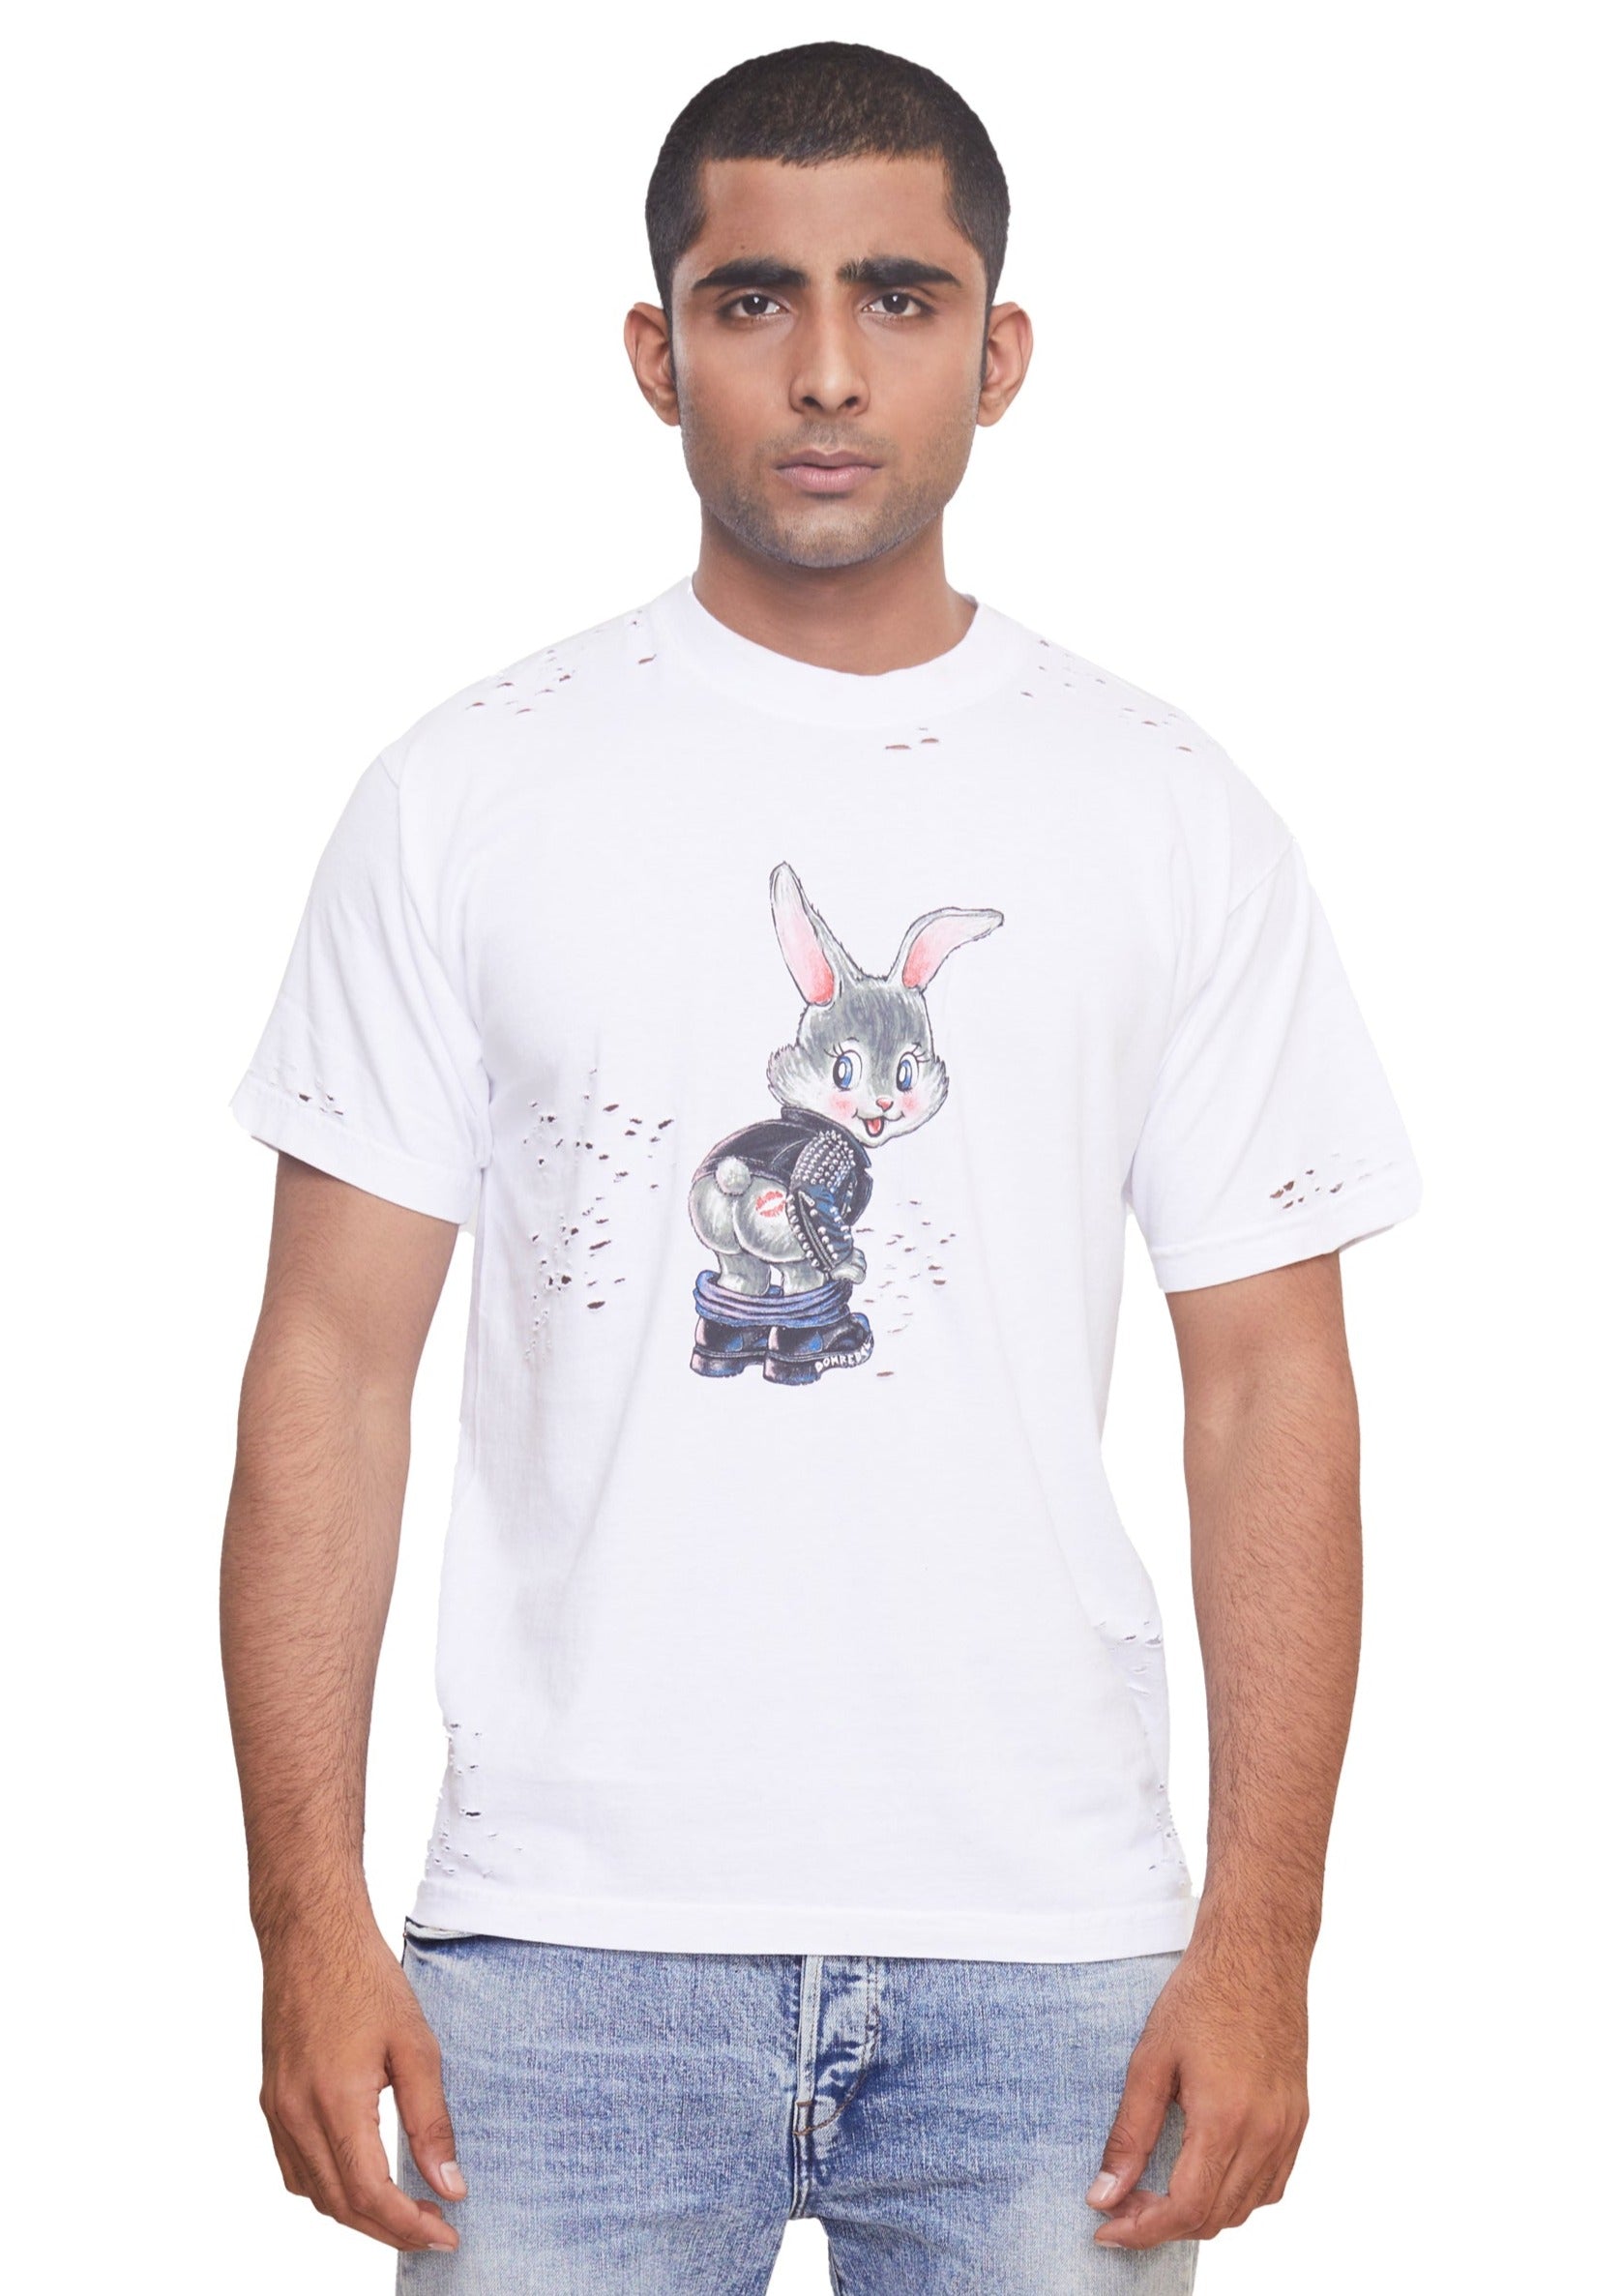 White Graphic t-shirt by Domrebel in a medium weight 100% cotton fabric with rabit print from the brand Domrebel